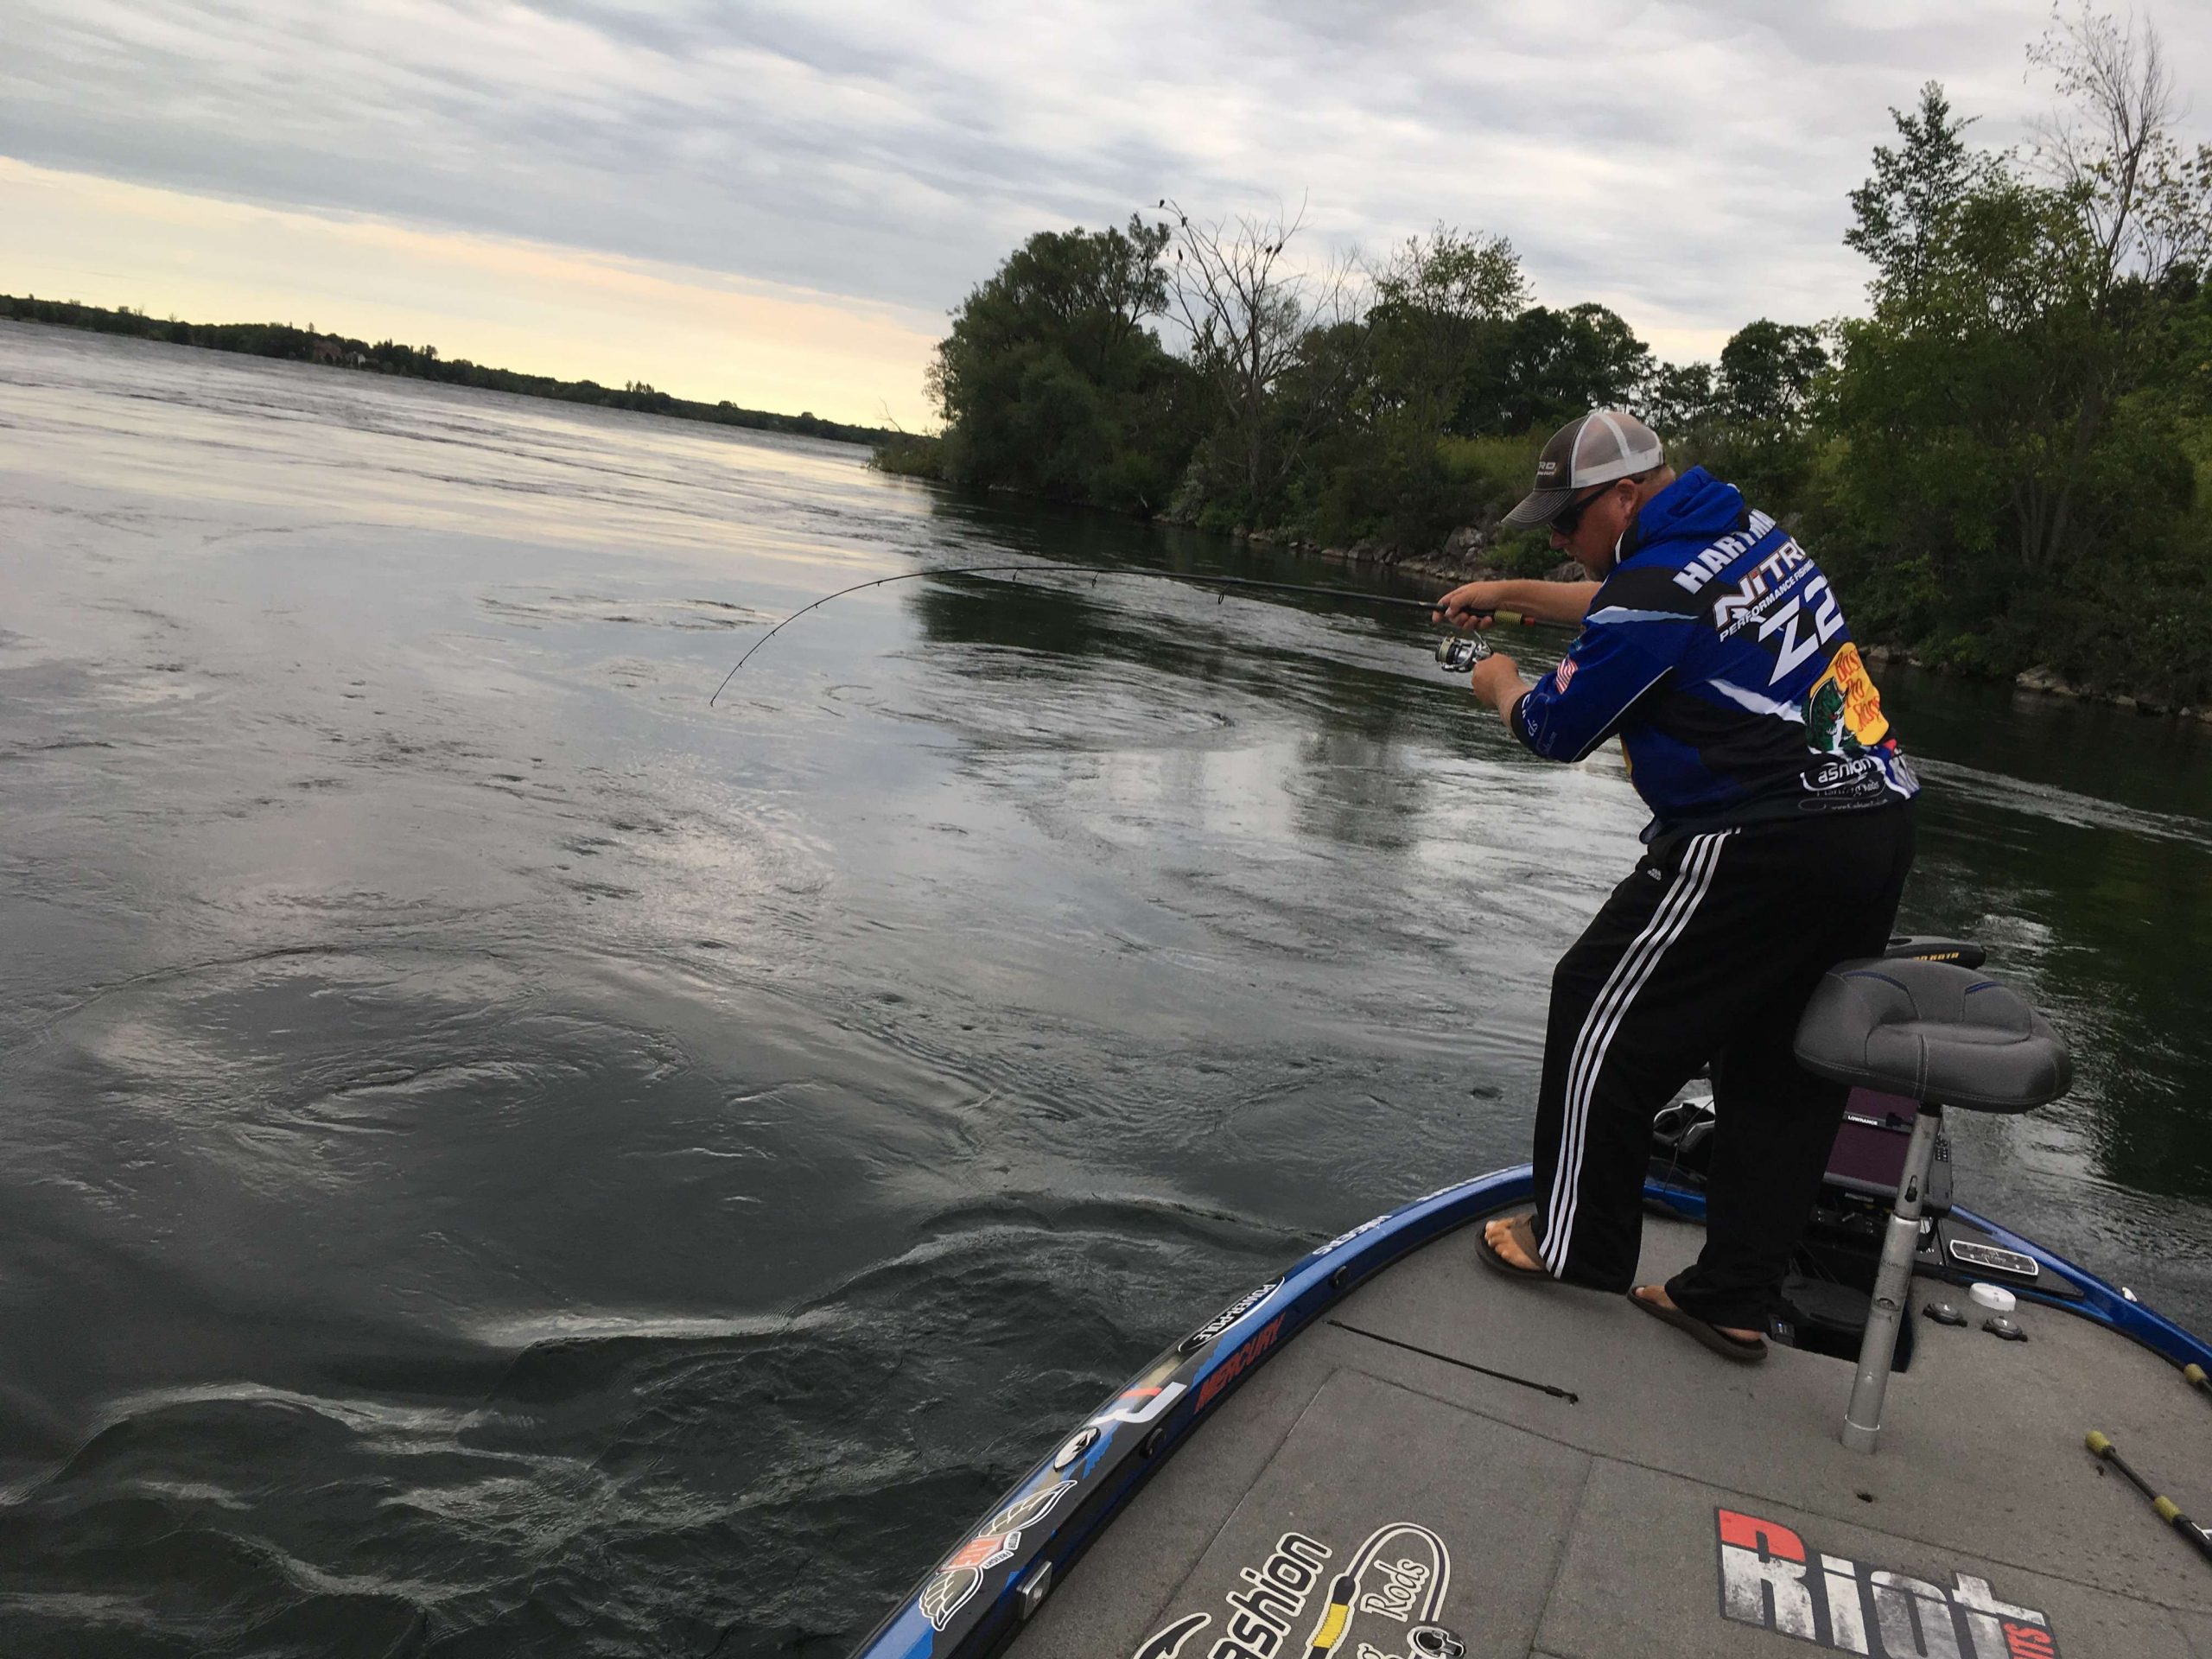 Jamie Hartman hooking up in back to back casts. The current takes him flying as he maneuvers to get the fish to the boat & so far, he's got them all safely in the livewell. 